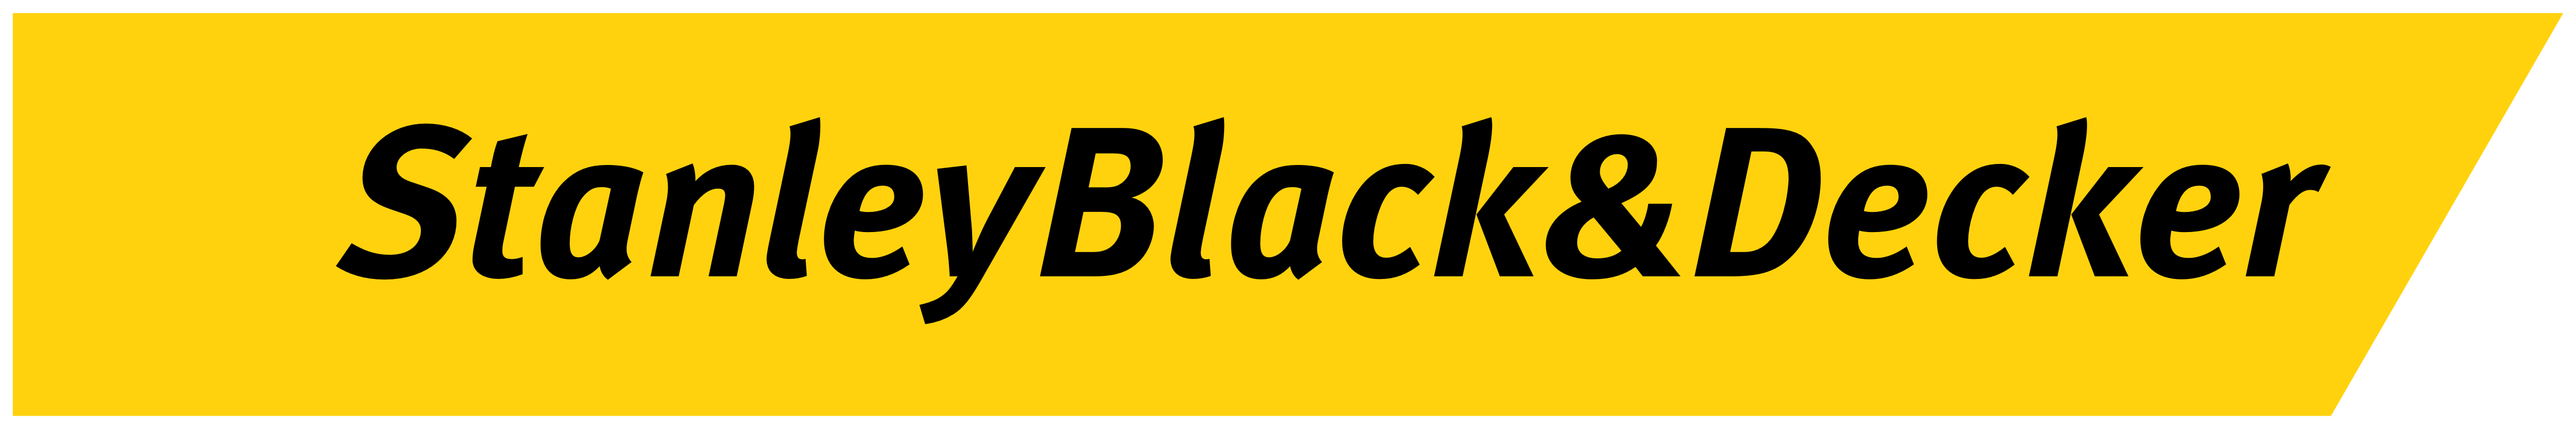 Stanley Black & Decker Selects TruIdentity Cloud for Passwordless Protection Across the Enterprise